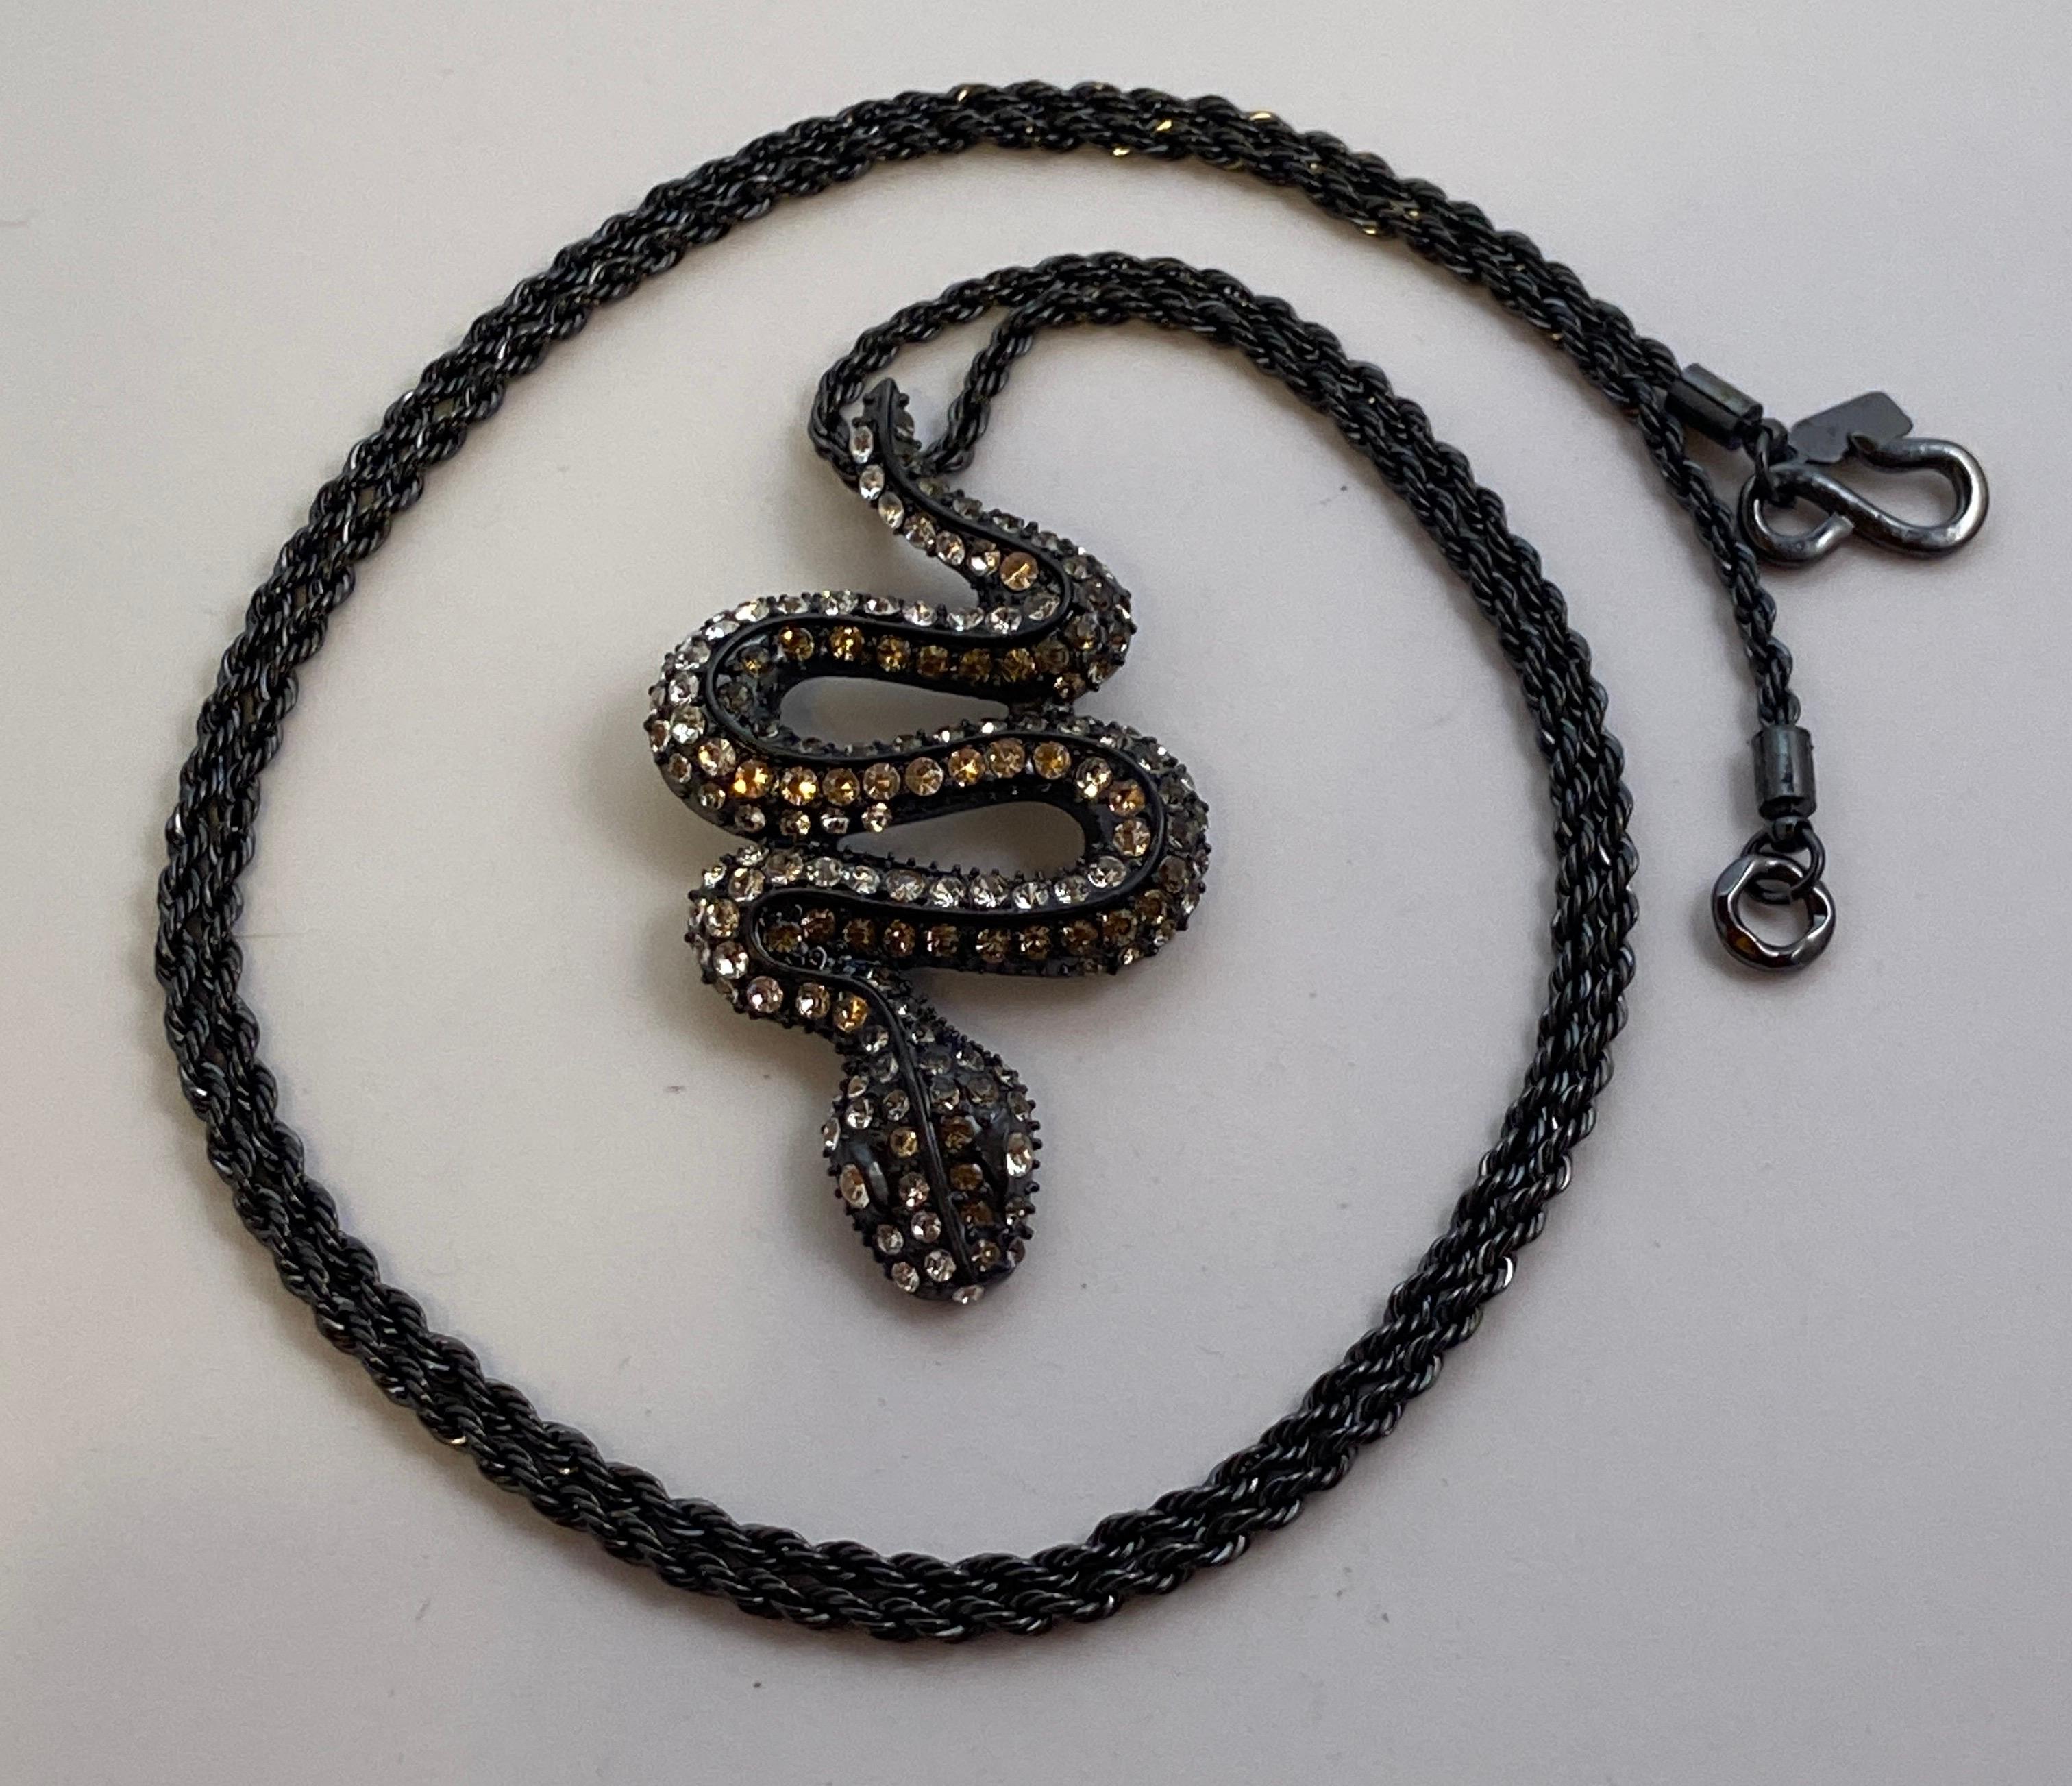    Kenneth Jay Lane's medium-size black 'snake' encrusted with rhinestones pendant hangs whimsically on a black rope hardware necklace. The necklace measures 34 inches in total length. The pendant measures 2 5/8 inches in length, width measures 1 